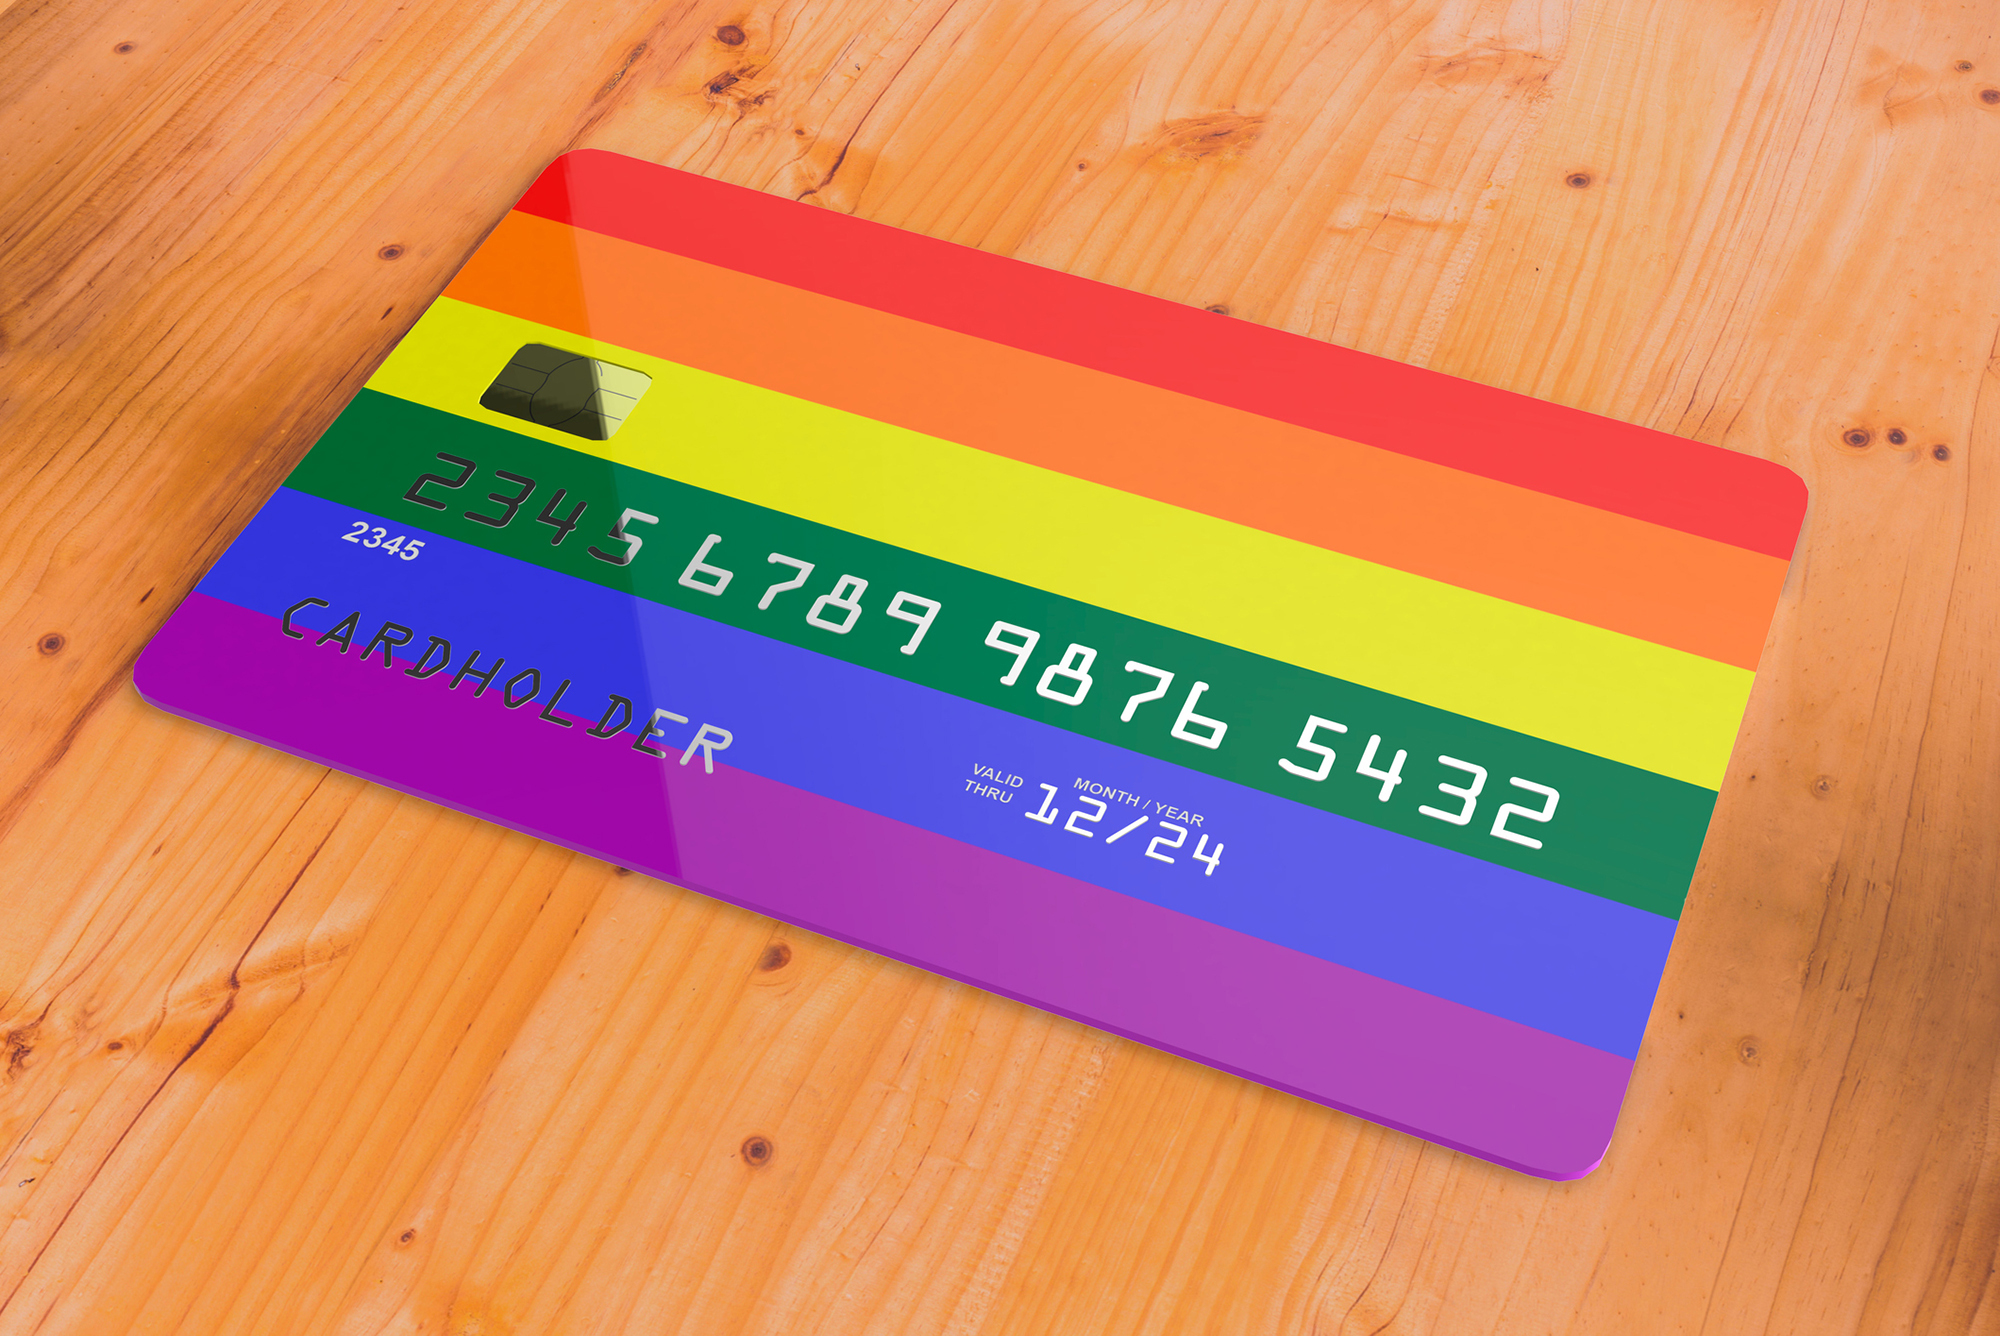 Credit card with rainbow stripes.